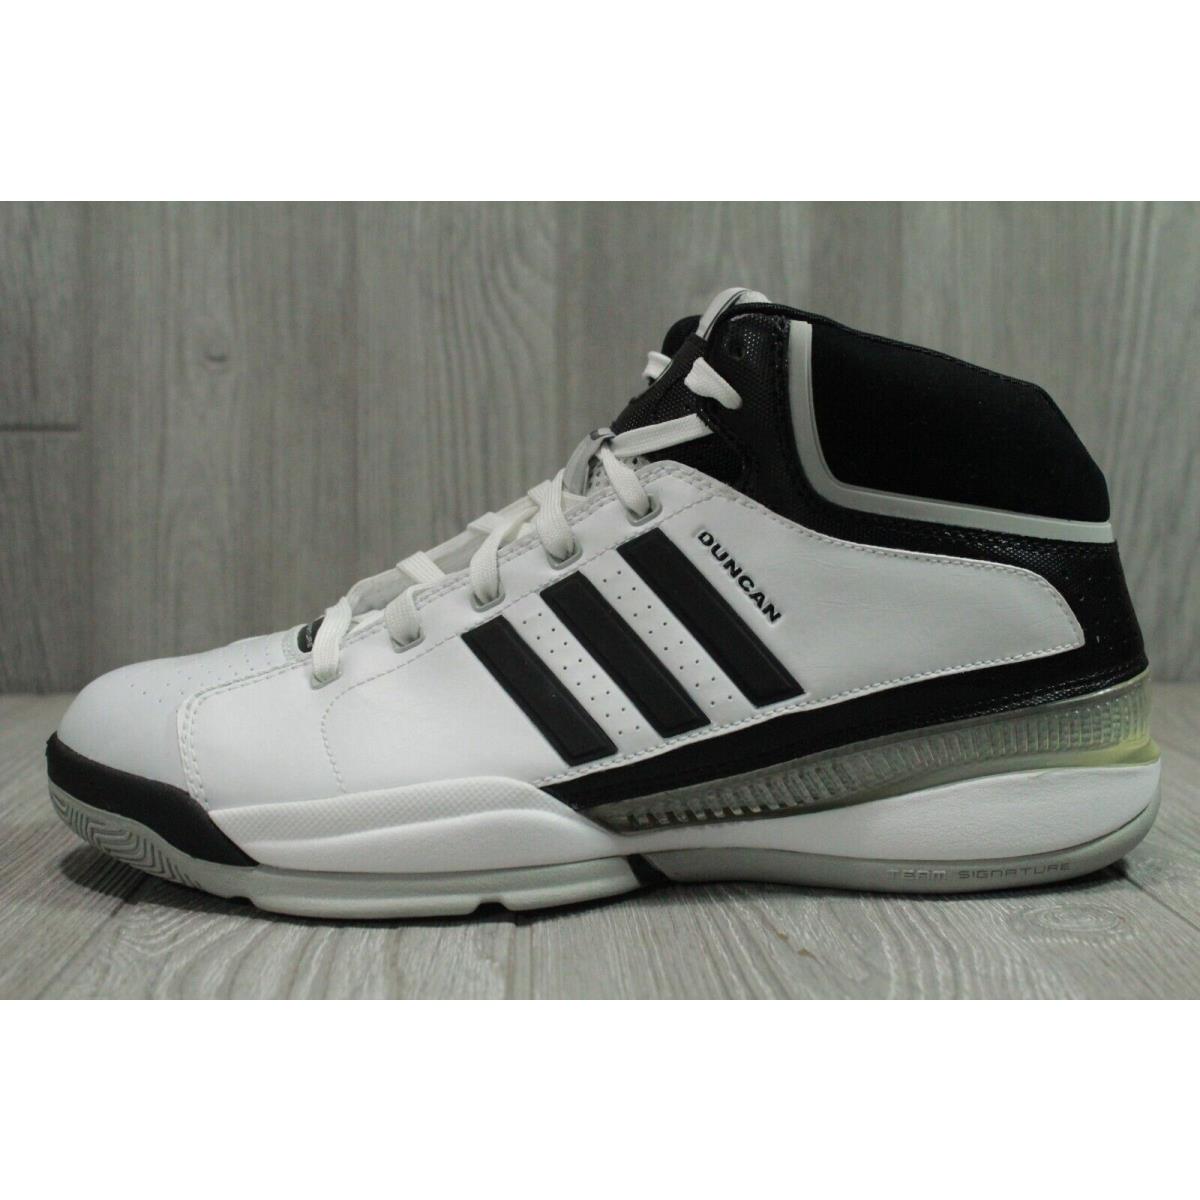 May if you can Green beans Vintage Adidas TS Lightswitch Play Tim Duncan 2007 Shoes Mens 9.5 - 12 Oss  | 692740451022 - Adidas shoes - White | SporTipTop